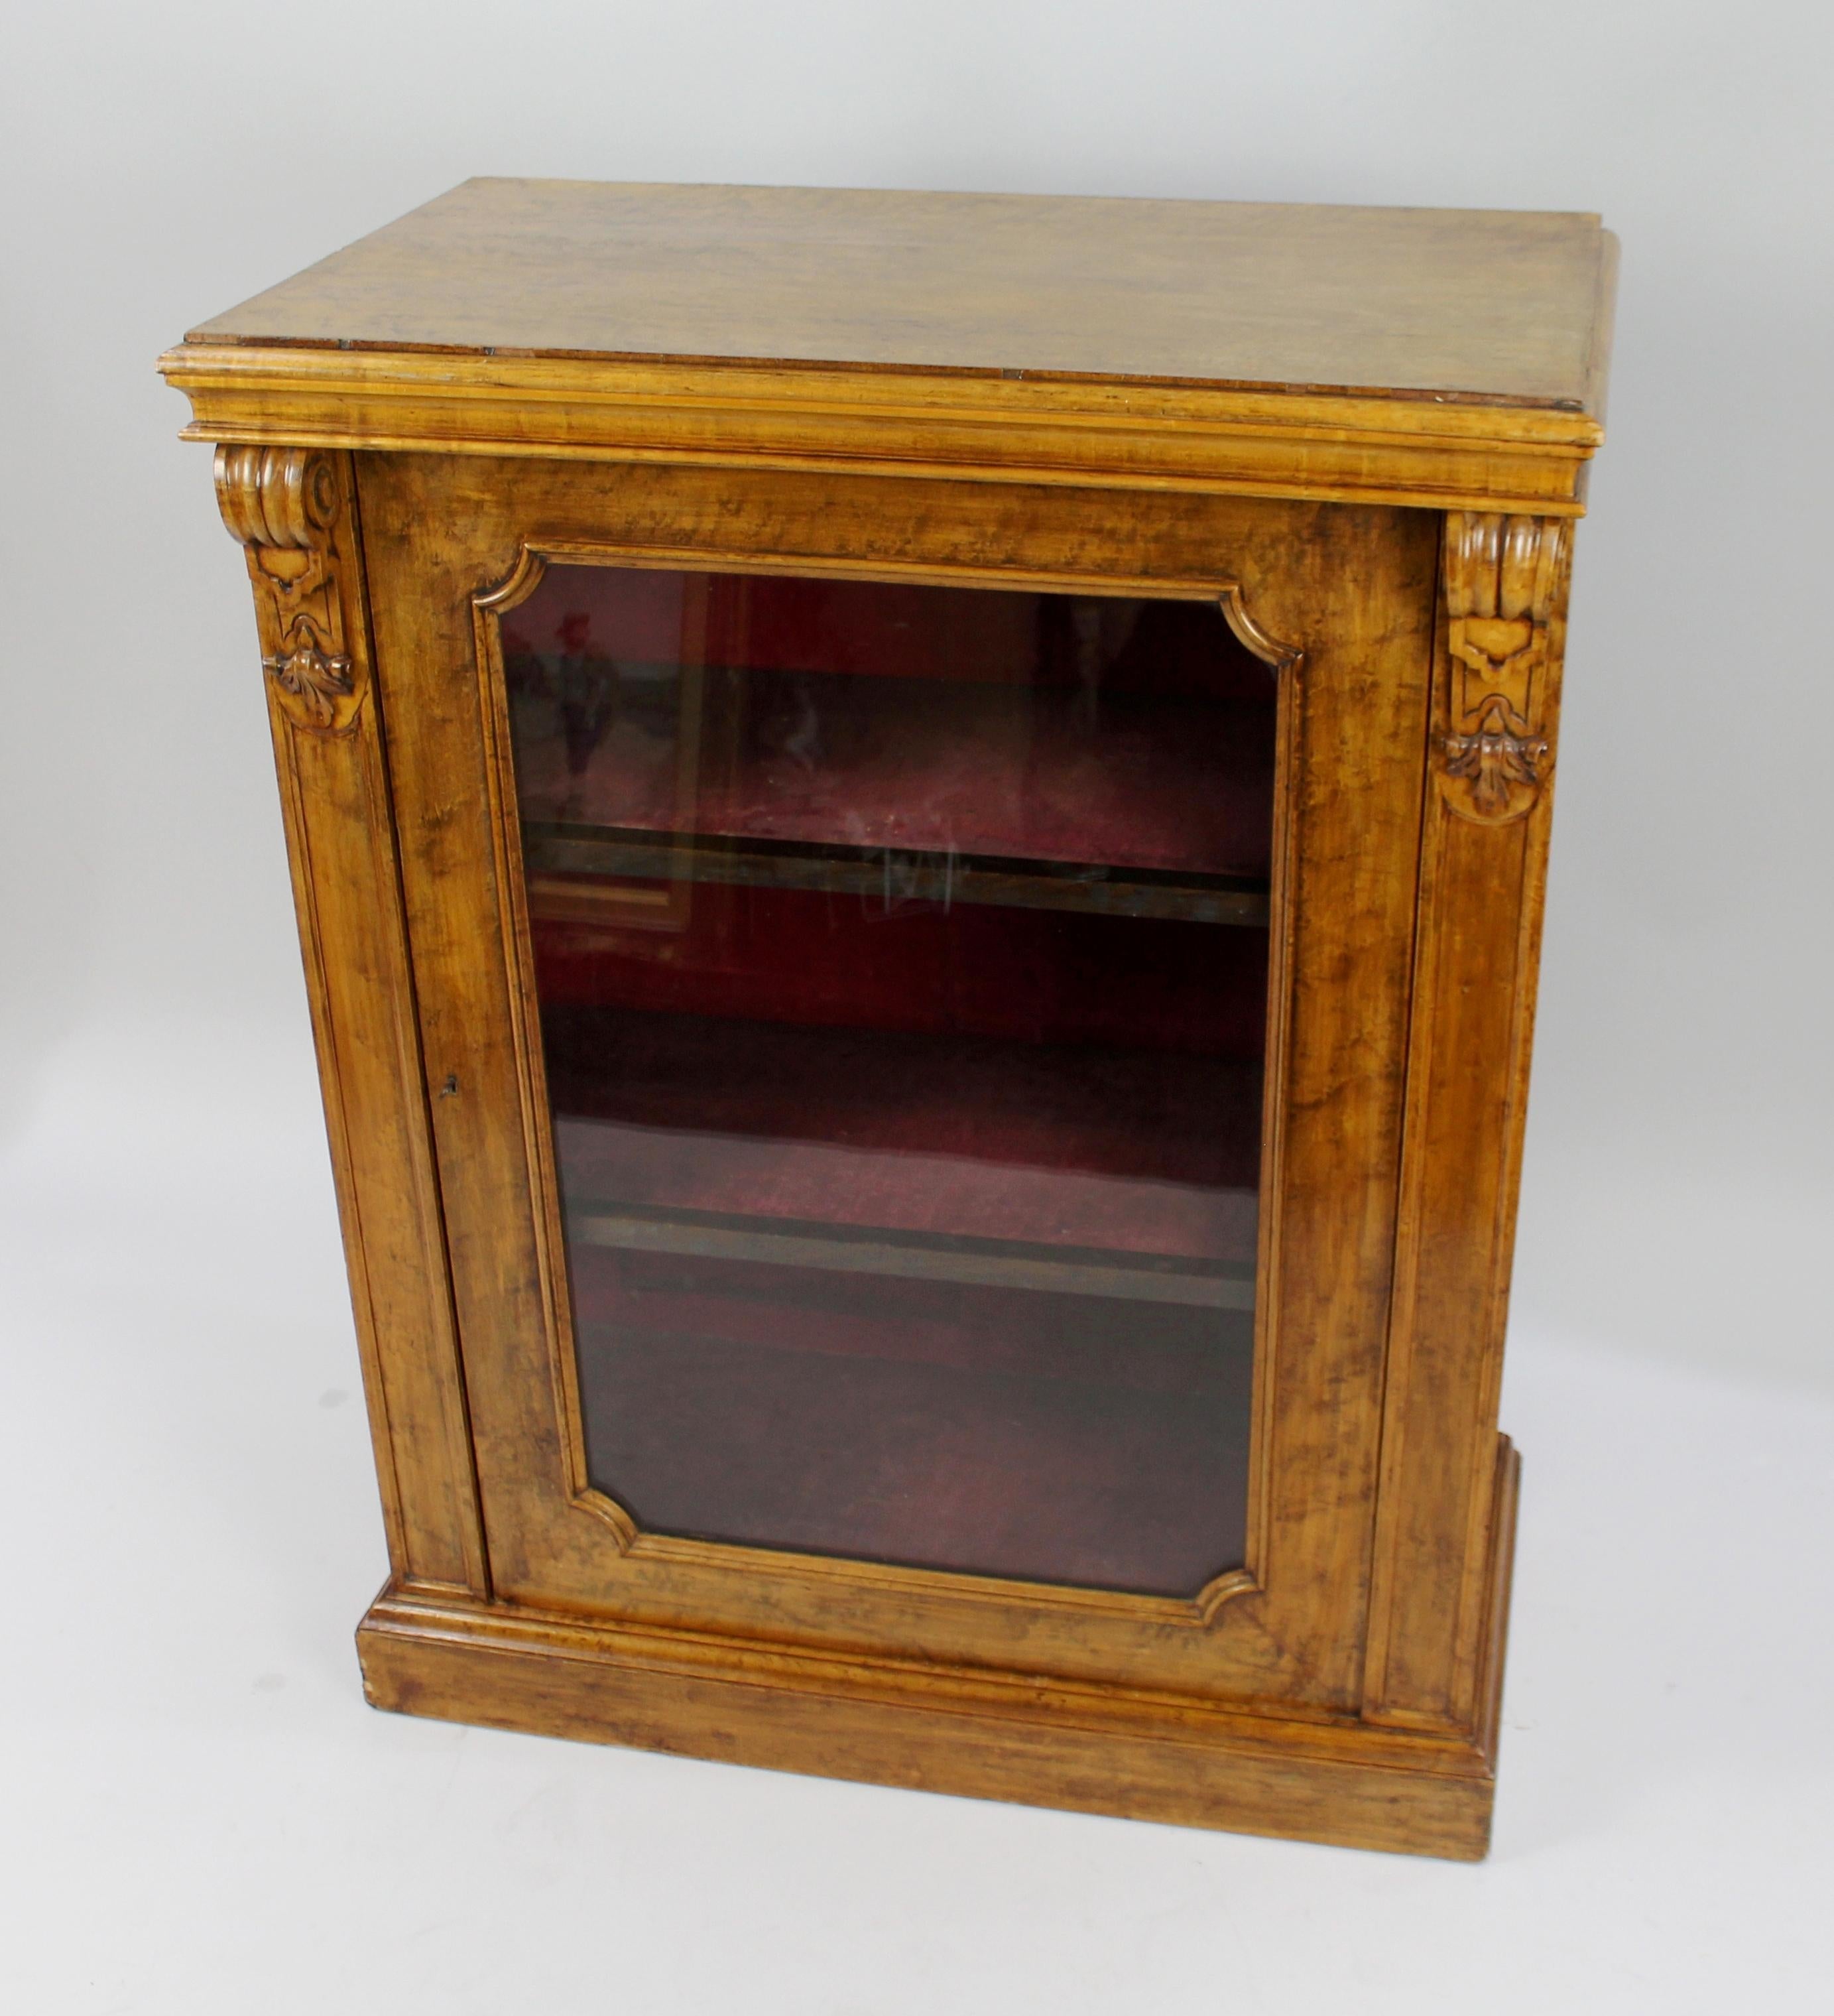 Period 
Victorian, circa 1870

Wood 
Walnut

Condition 
Sound structural condition. Faded aged colour to the wood. Some scratches and a little wear to finish. Original red velvet lined interior. Some lifting to back of top as pictured
 

